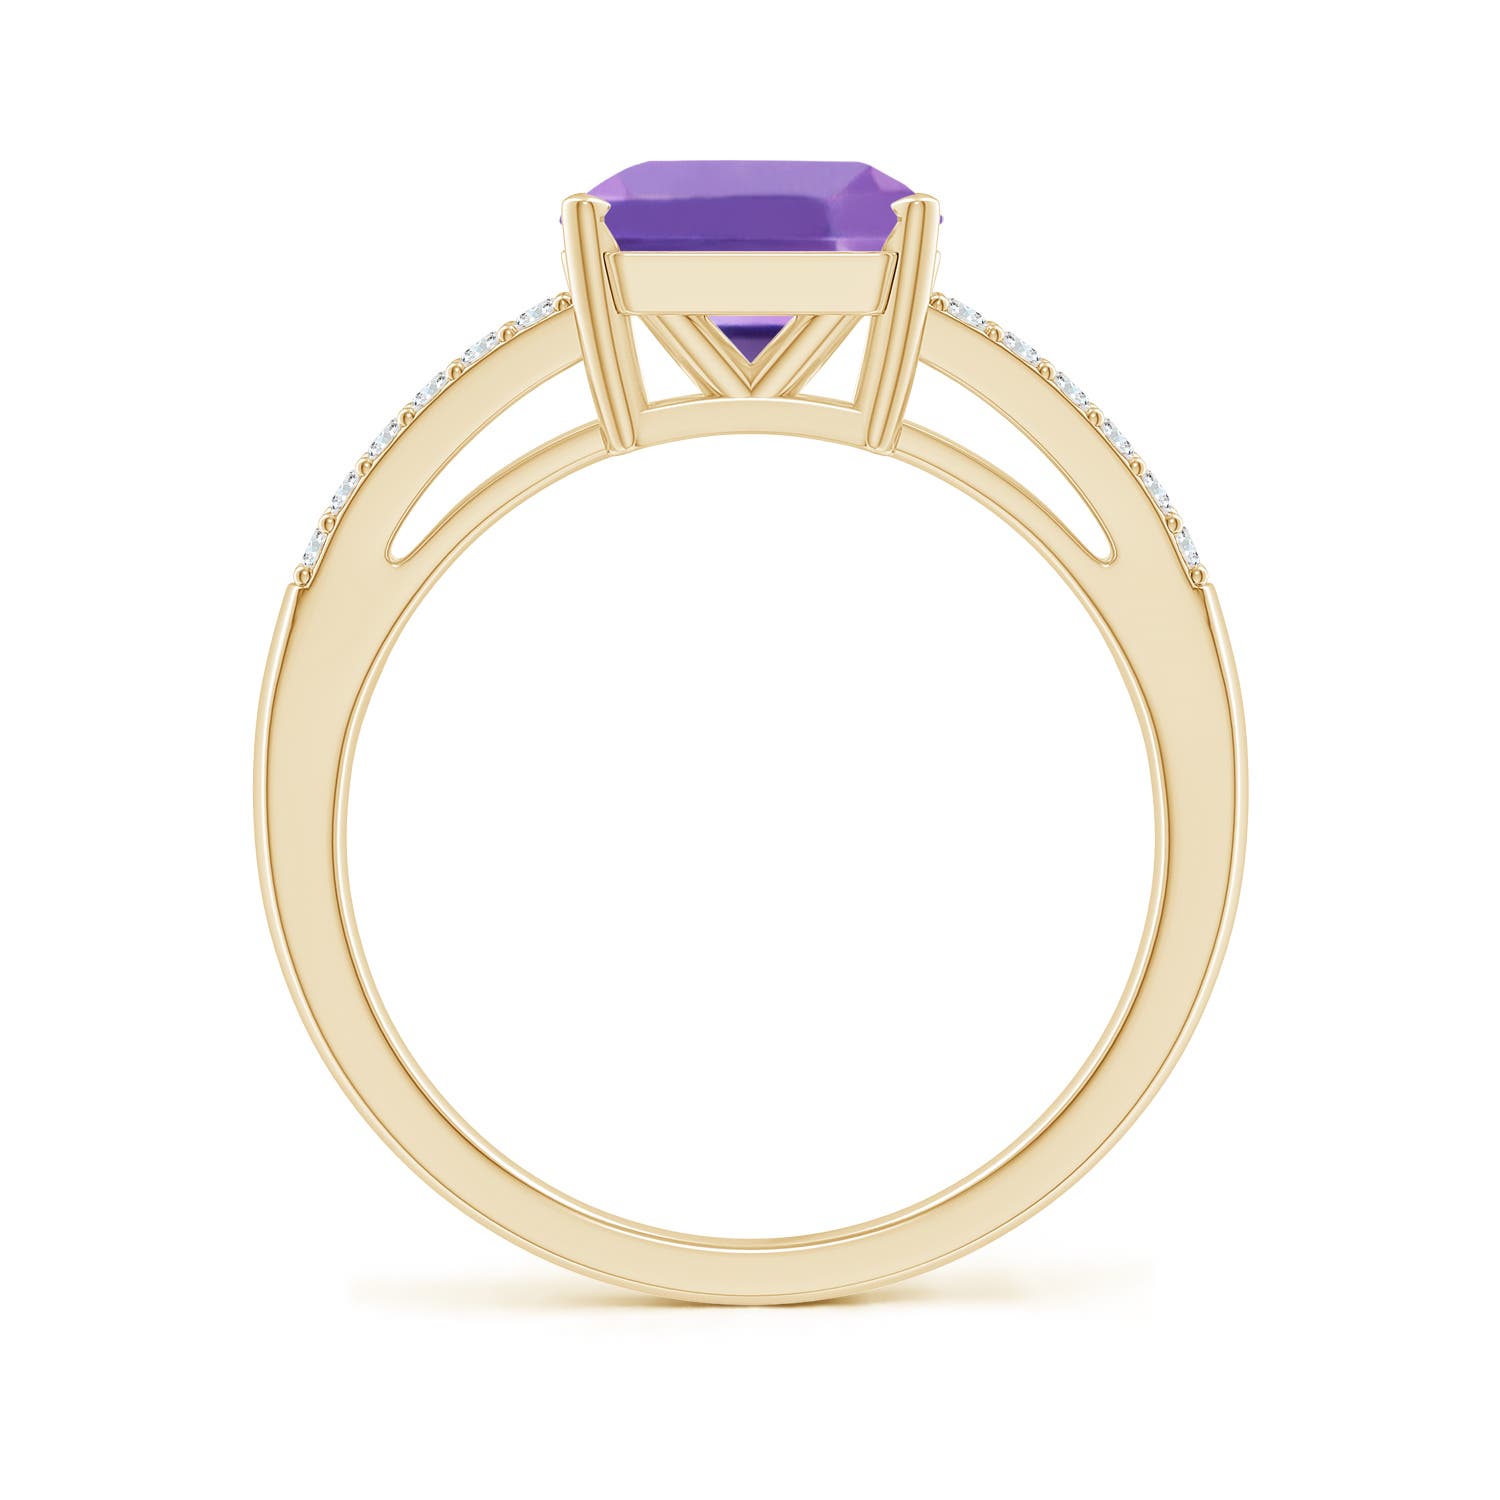 A - Amethyst / 2.24 CT / 14 KT Yellow Gold